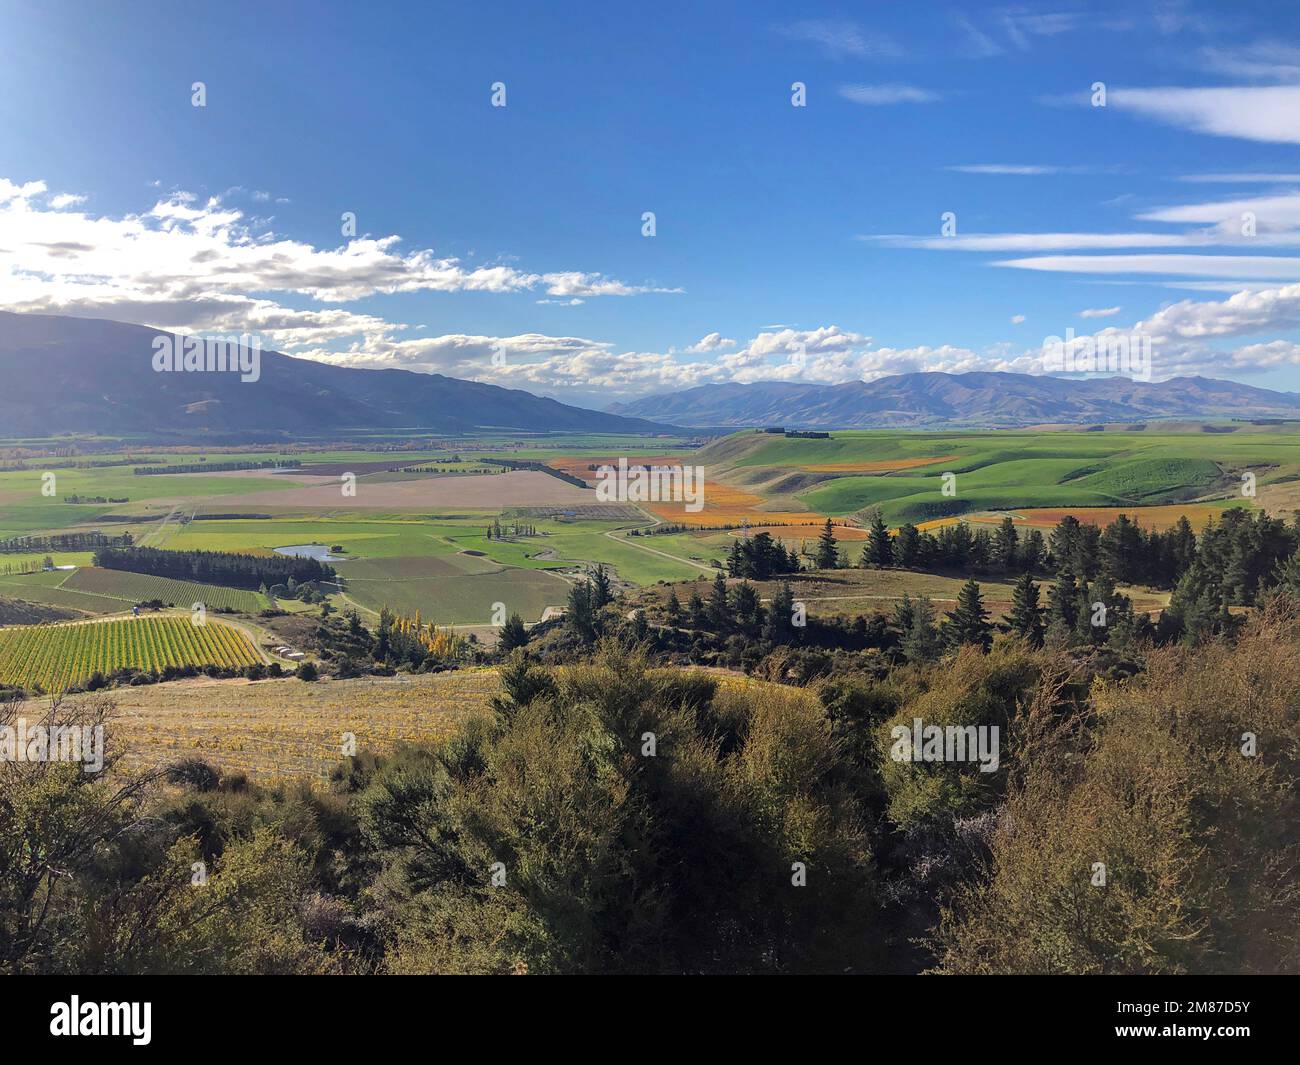 A high view from Bendigo over vineyards, green farmland and the Piza Mountain Range. Autumn blue sky and clouds. Stock Photo